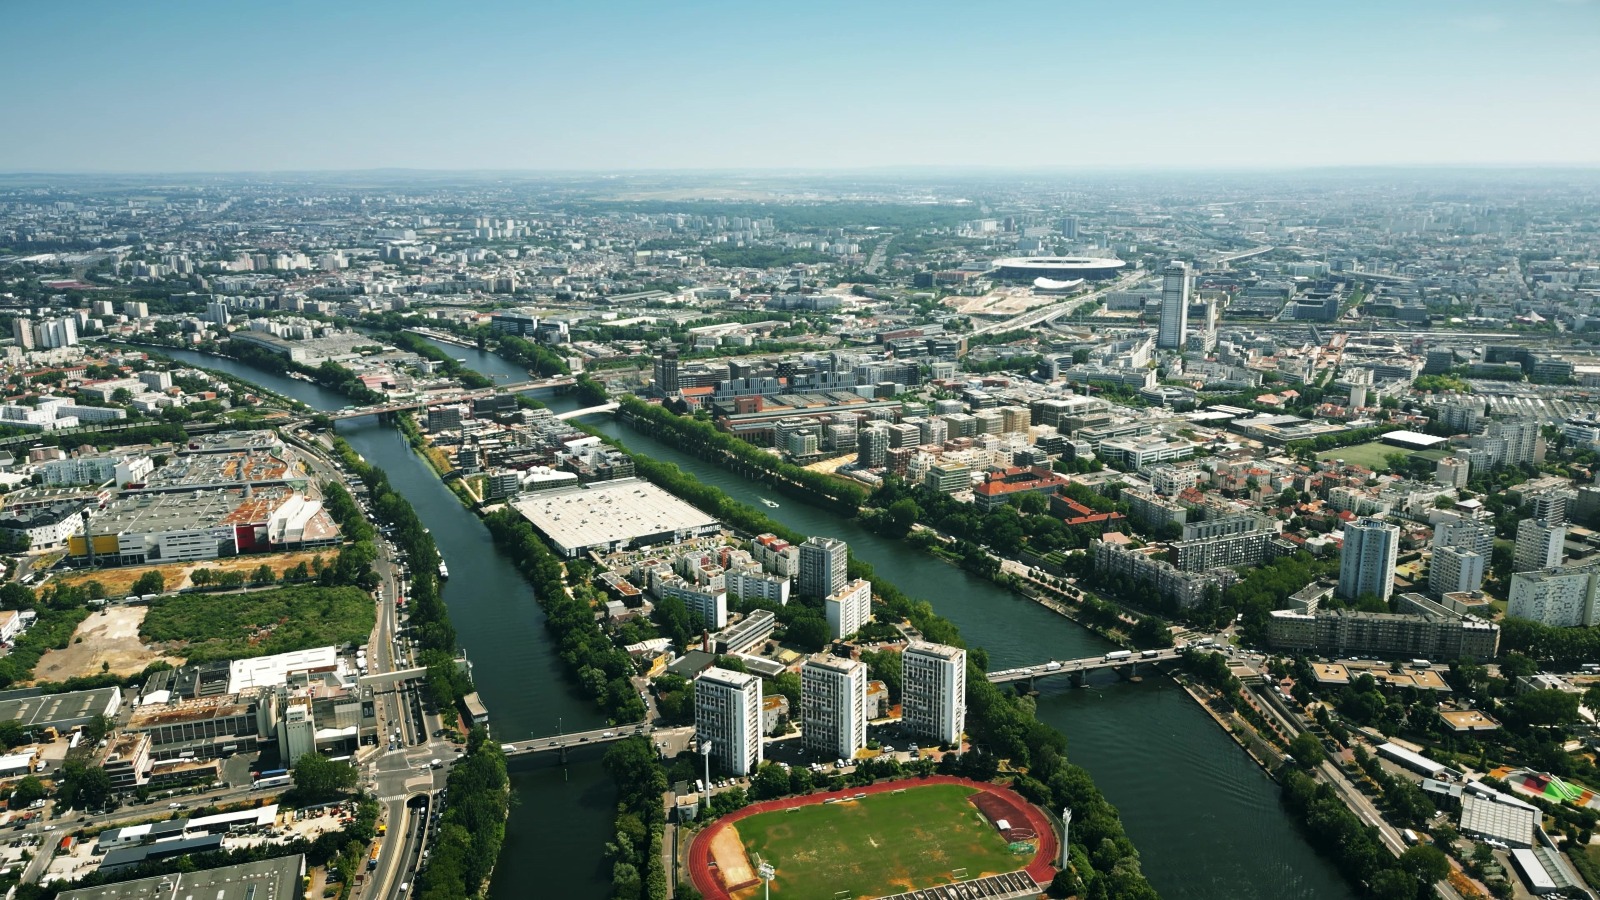 Aerial view of Saint-Denis involving the Seine River and famous Stade de France stadium to the north of Paris, France